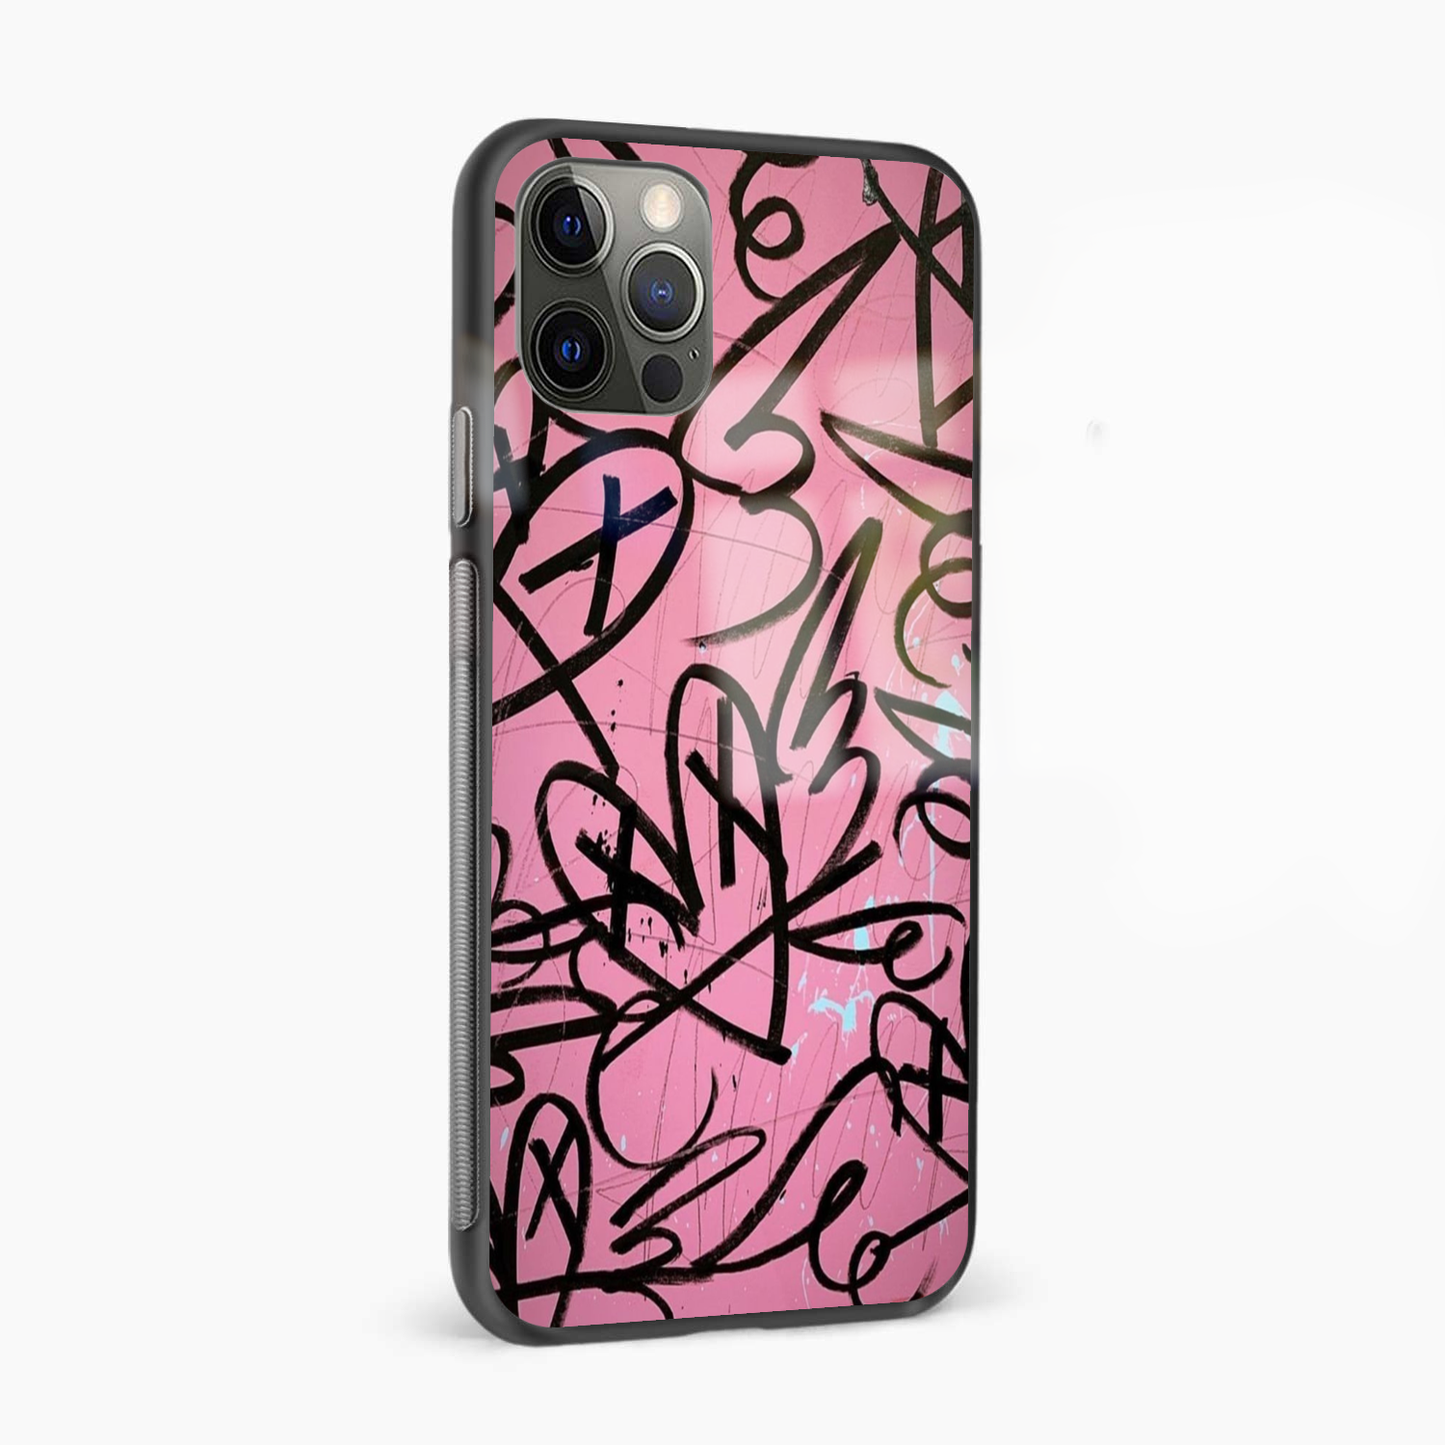 Pink Graffiti Abstract Glass Phone Case Cover - Aesthetic Phone Covers - Culltique